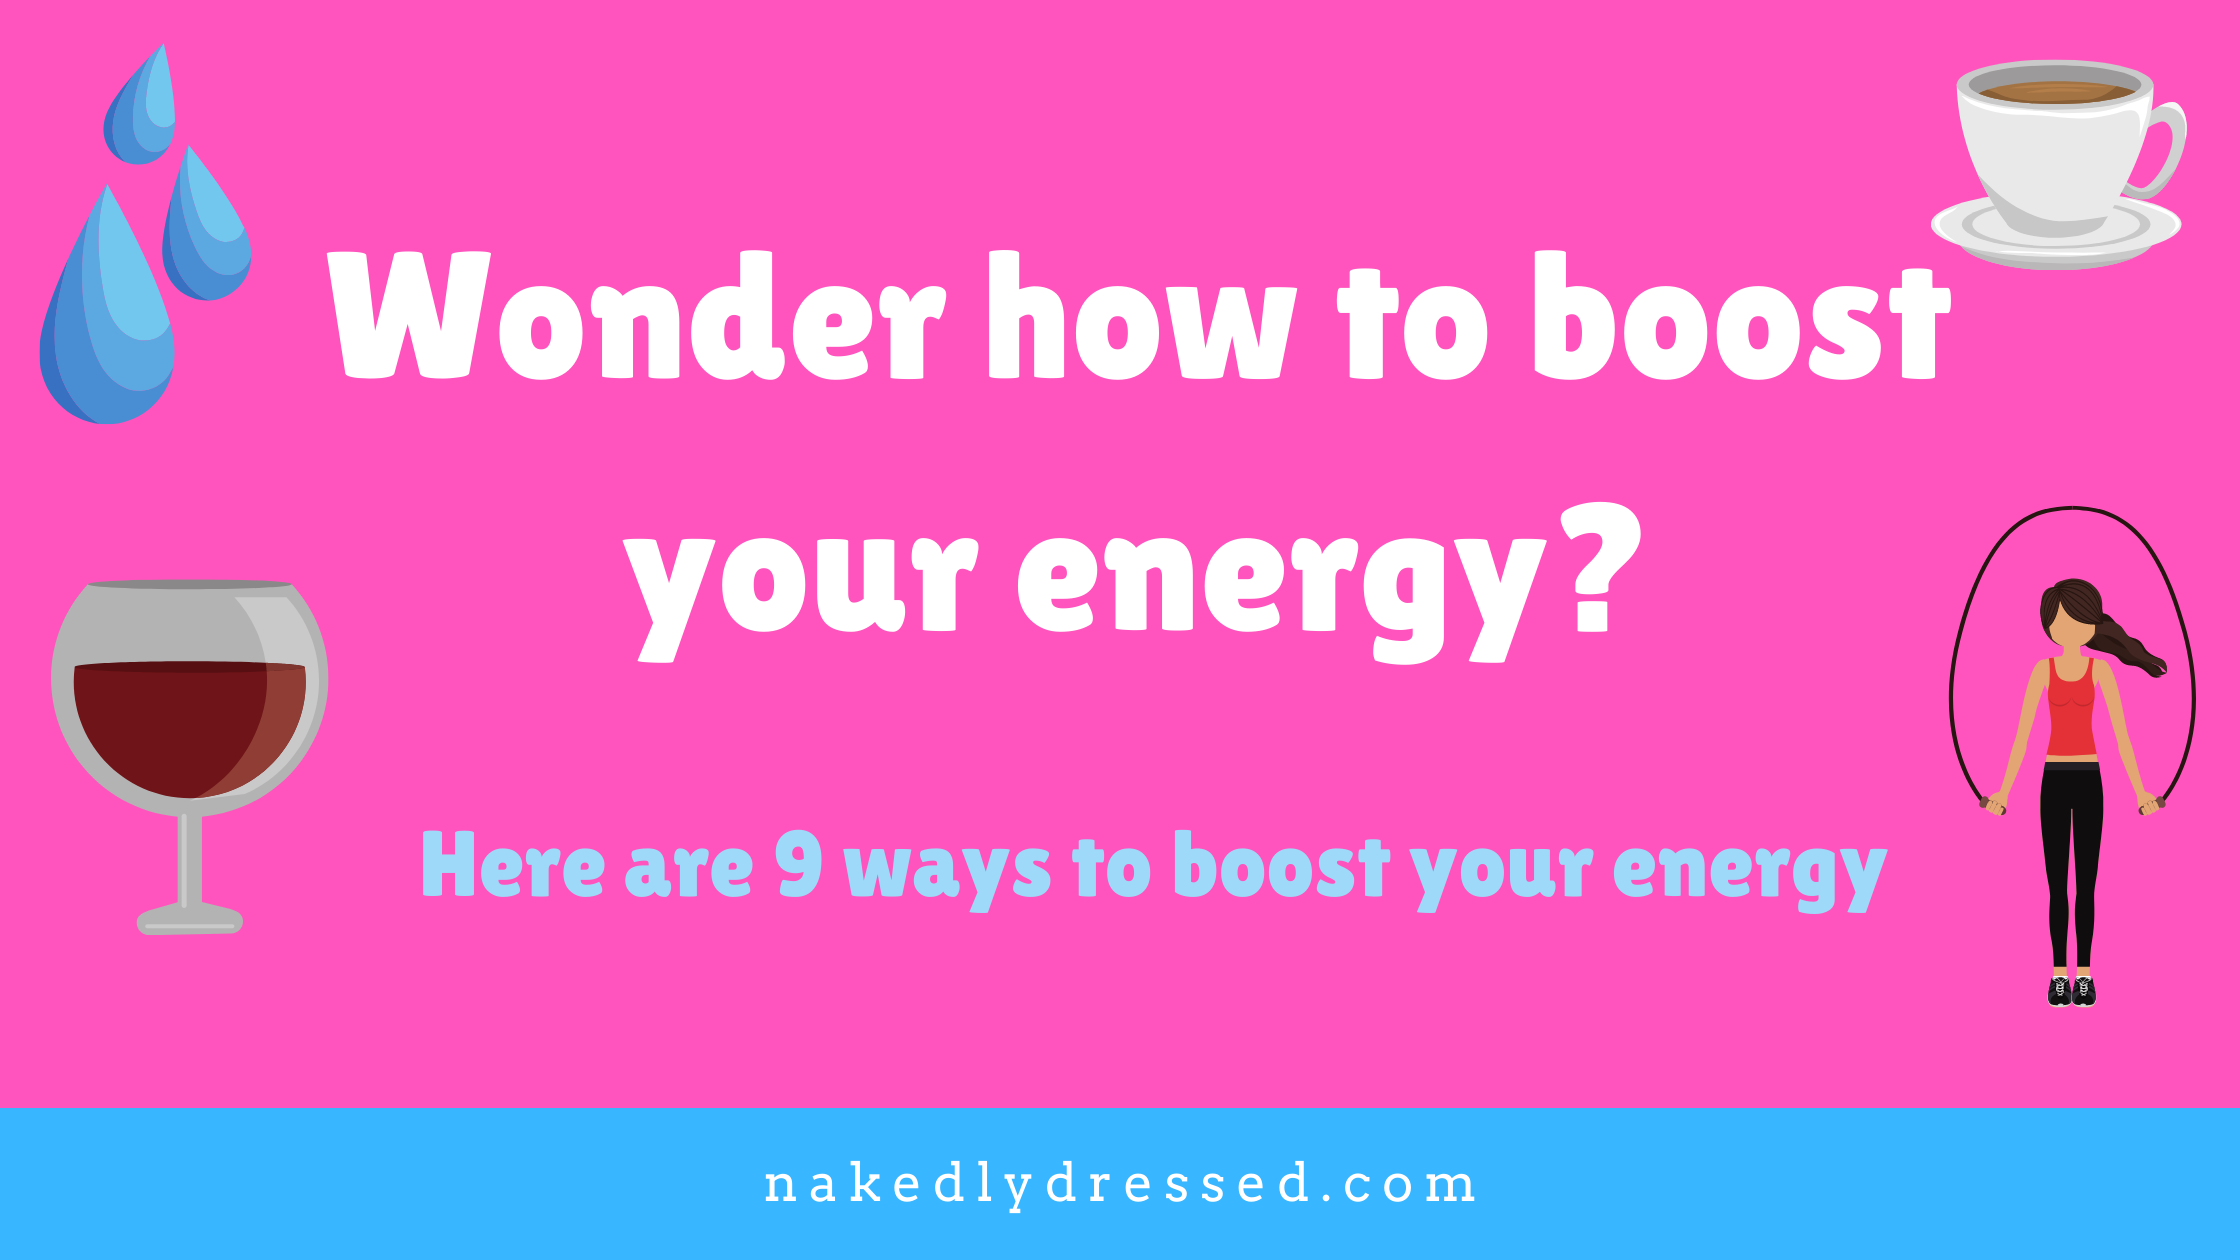 Wonder how to boost your energy? Here are 9 ways to boost your energy